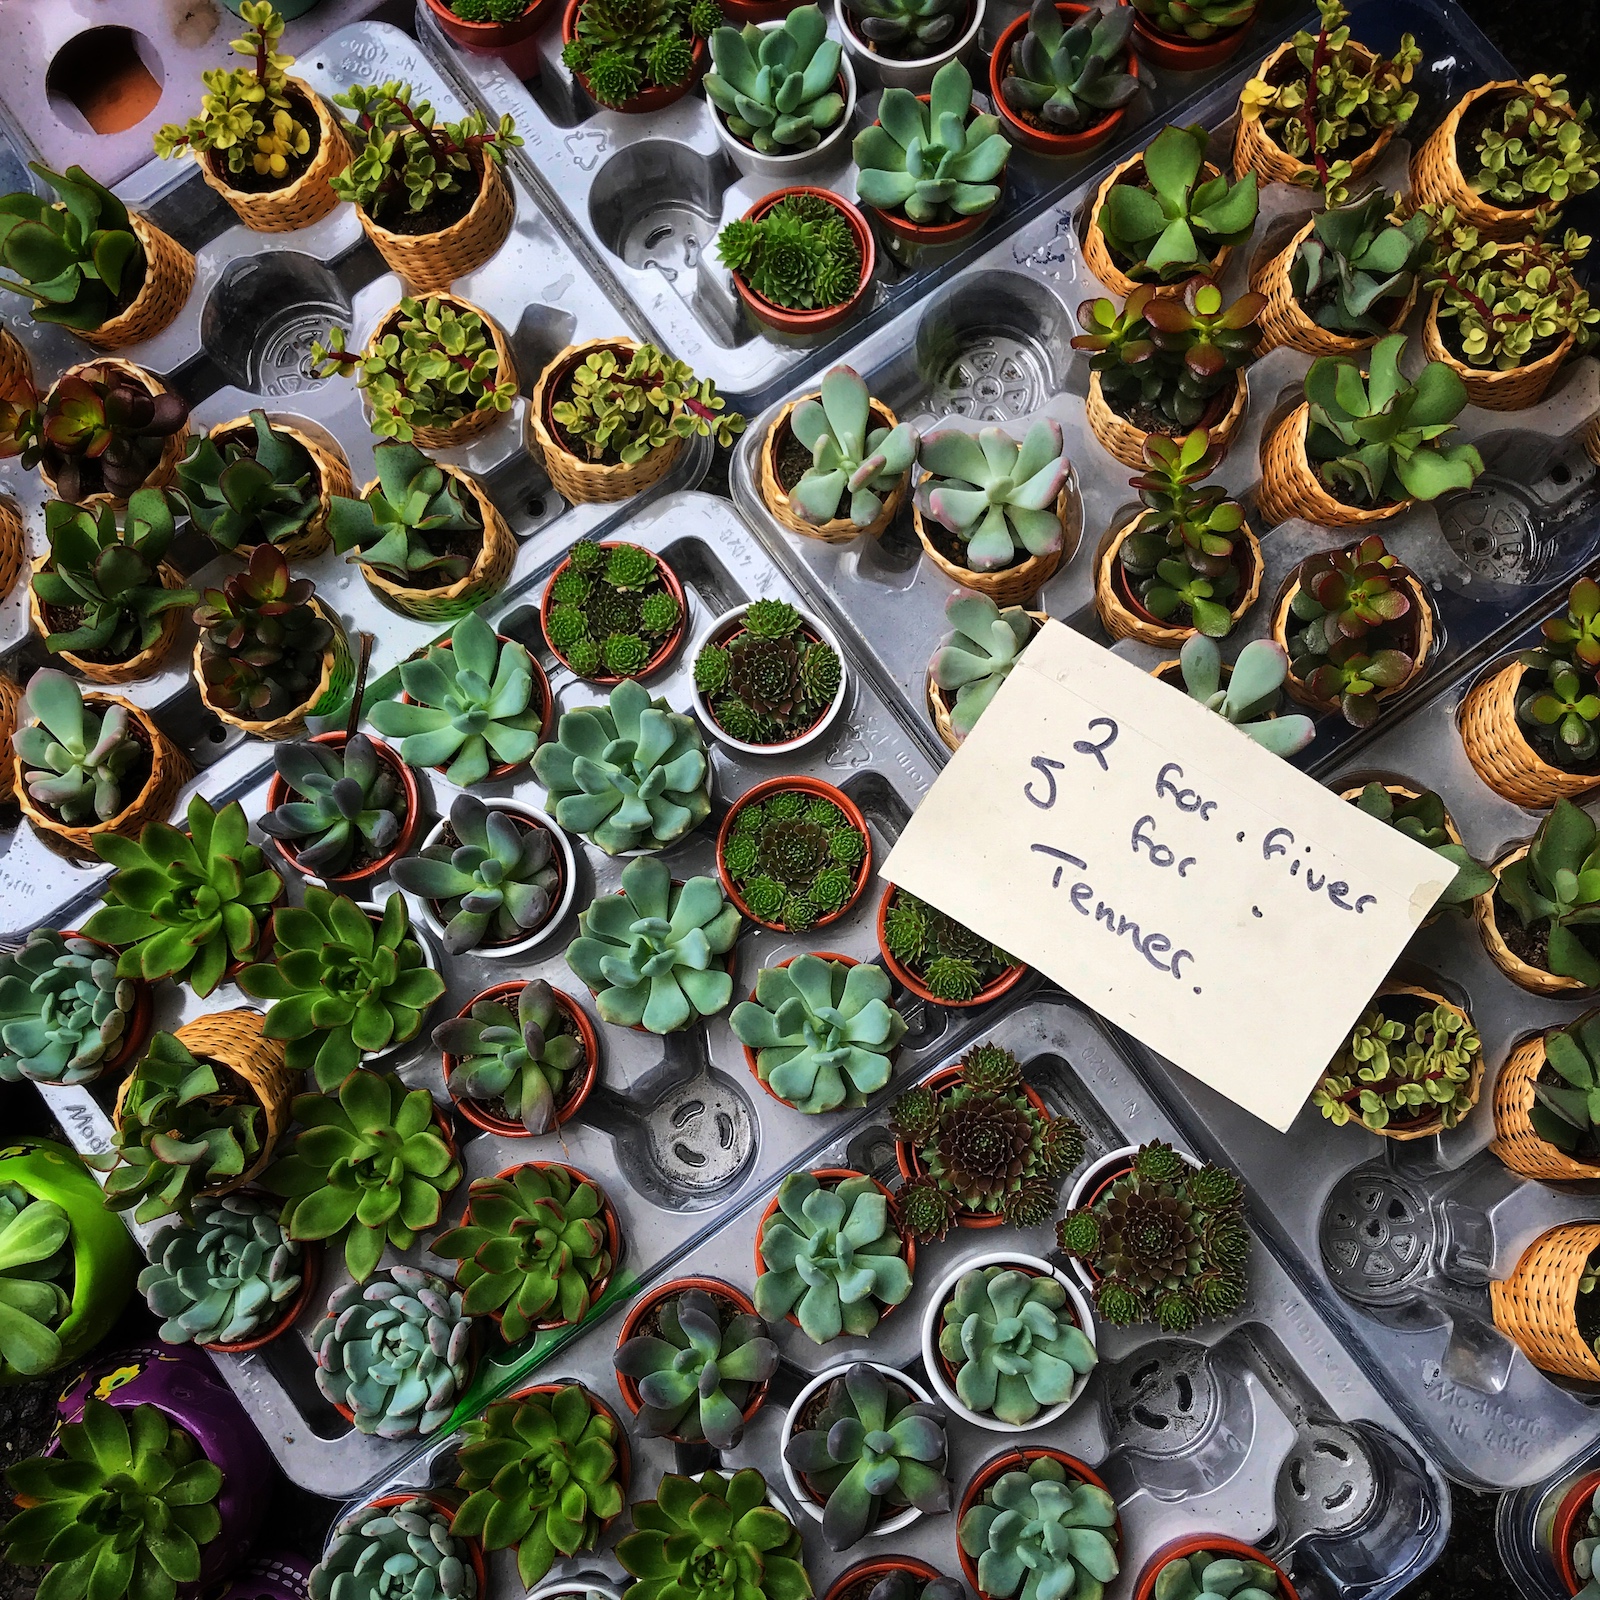 Trays full of succulent and cactus plants